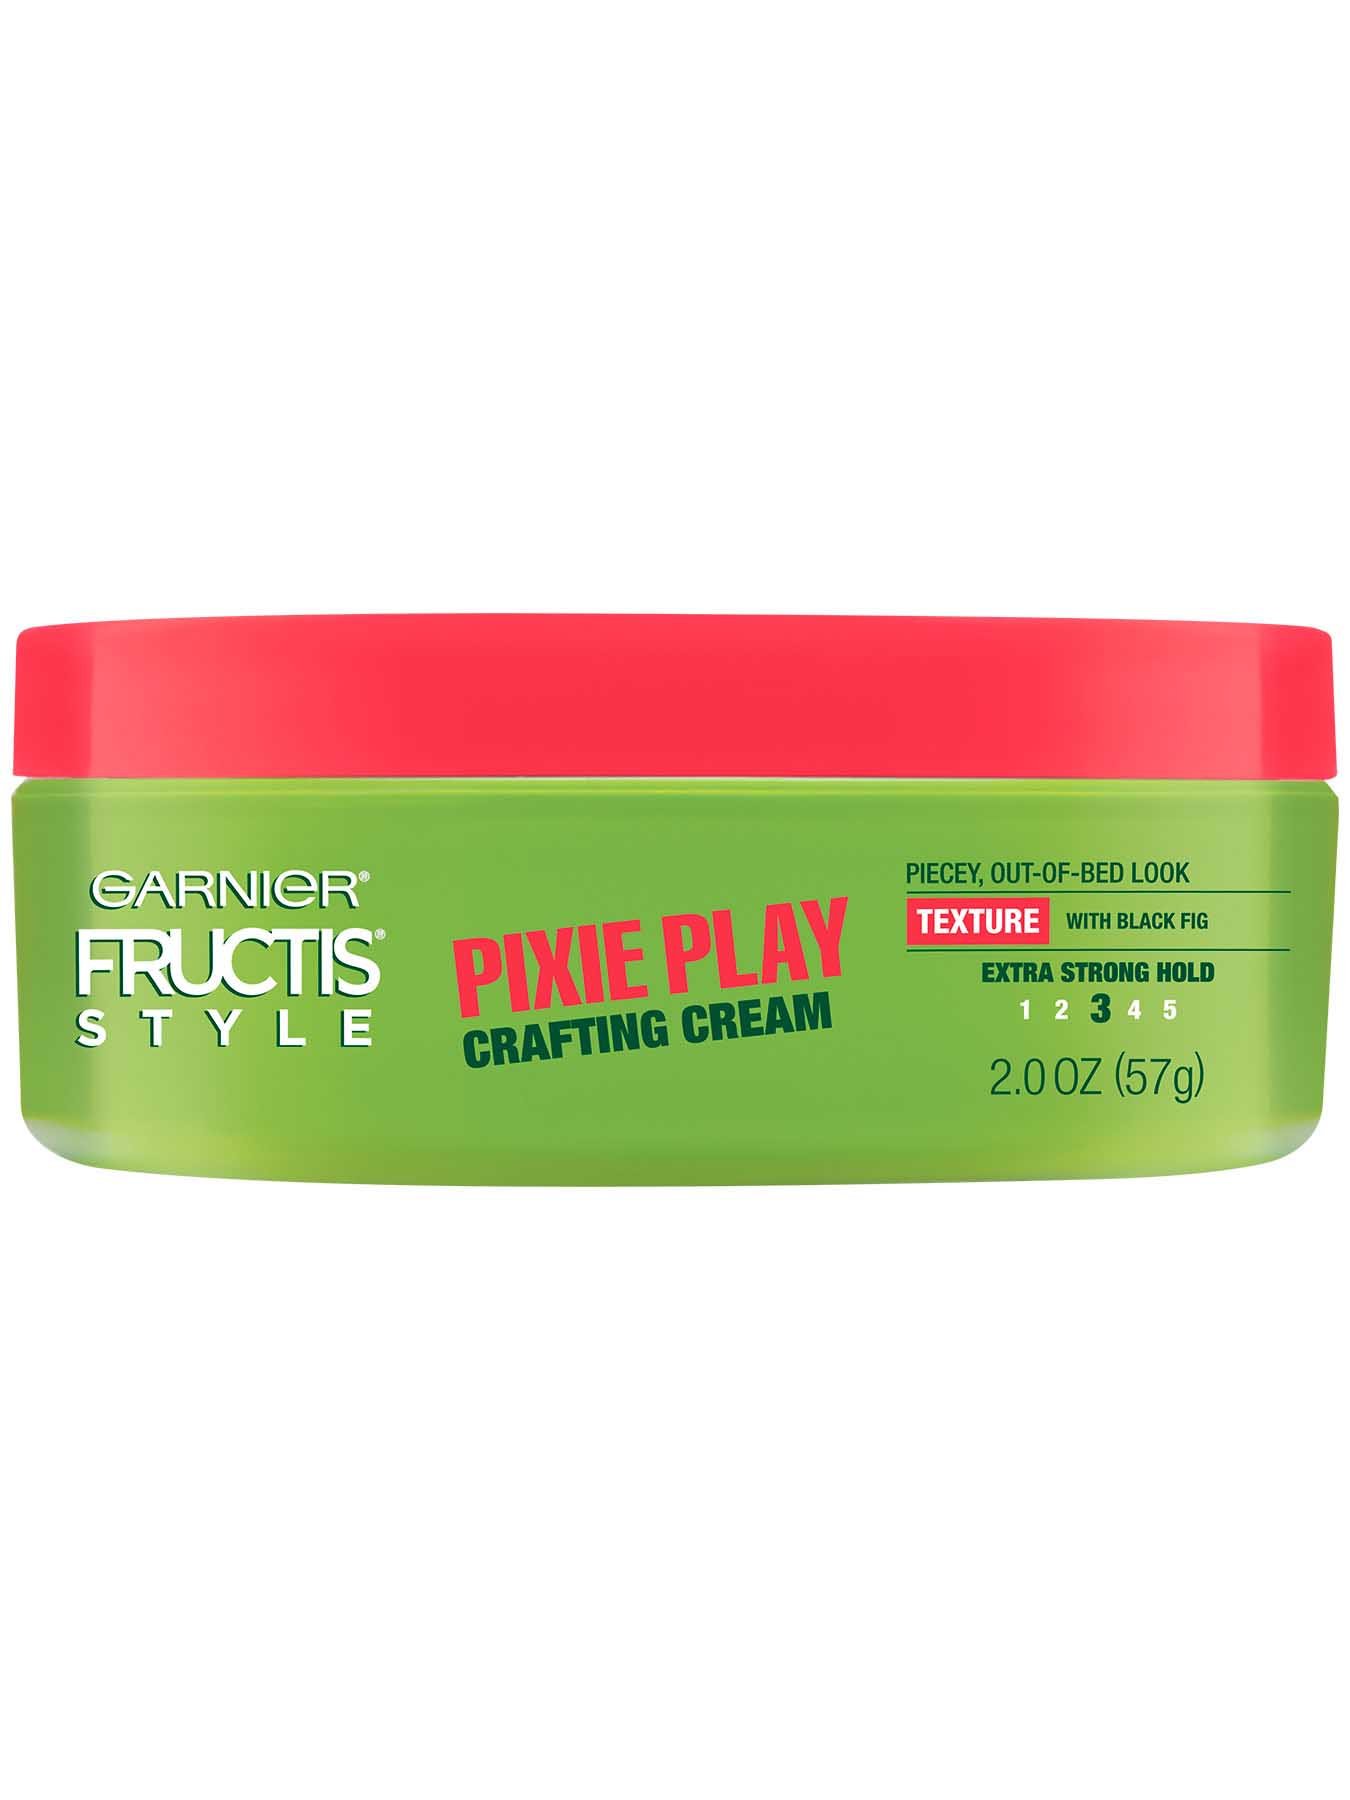 Front view of Pixie Play Crafting Cream.